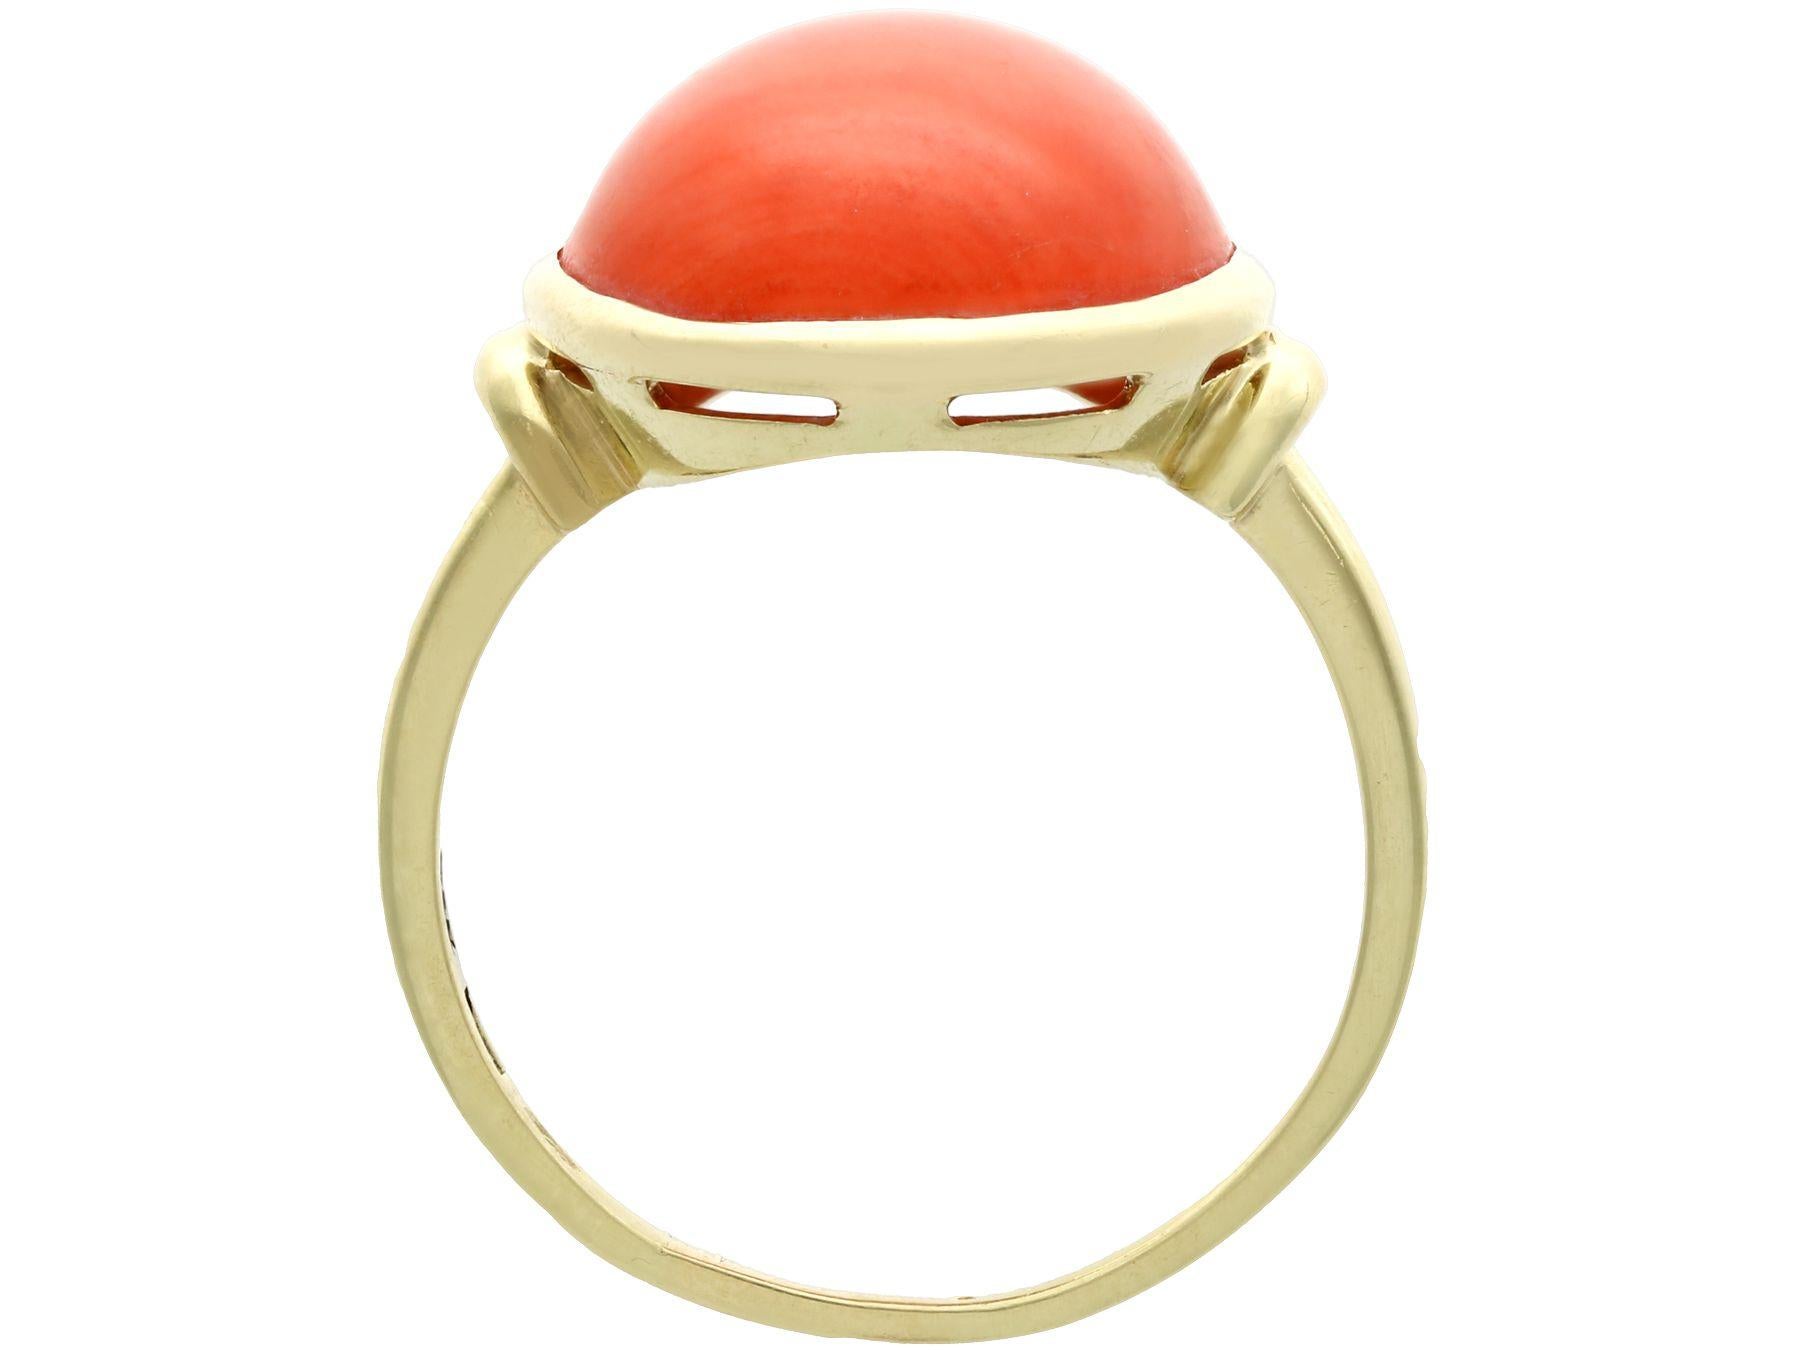 Women's Vintage 13.20 Carat Cabochon Cut Coral and Yellow Gold Ring, Circa 1950 For Sale